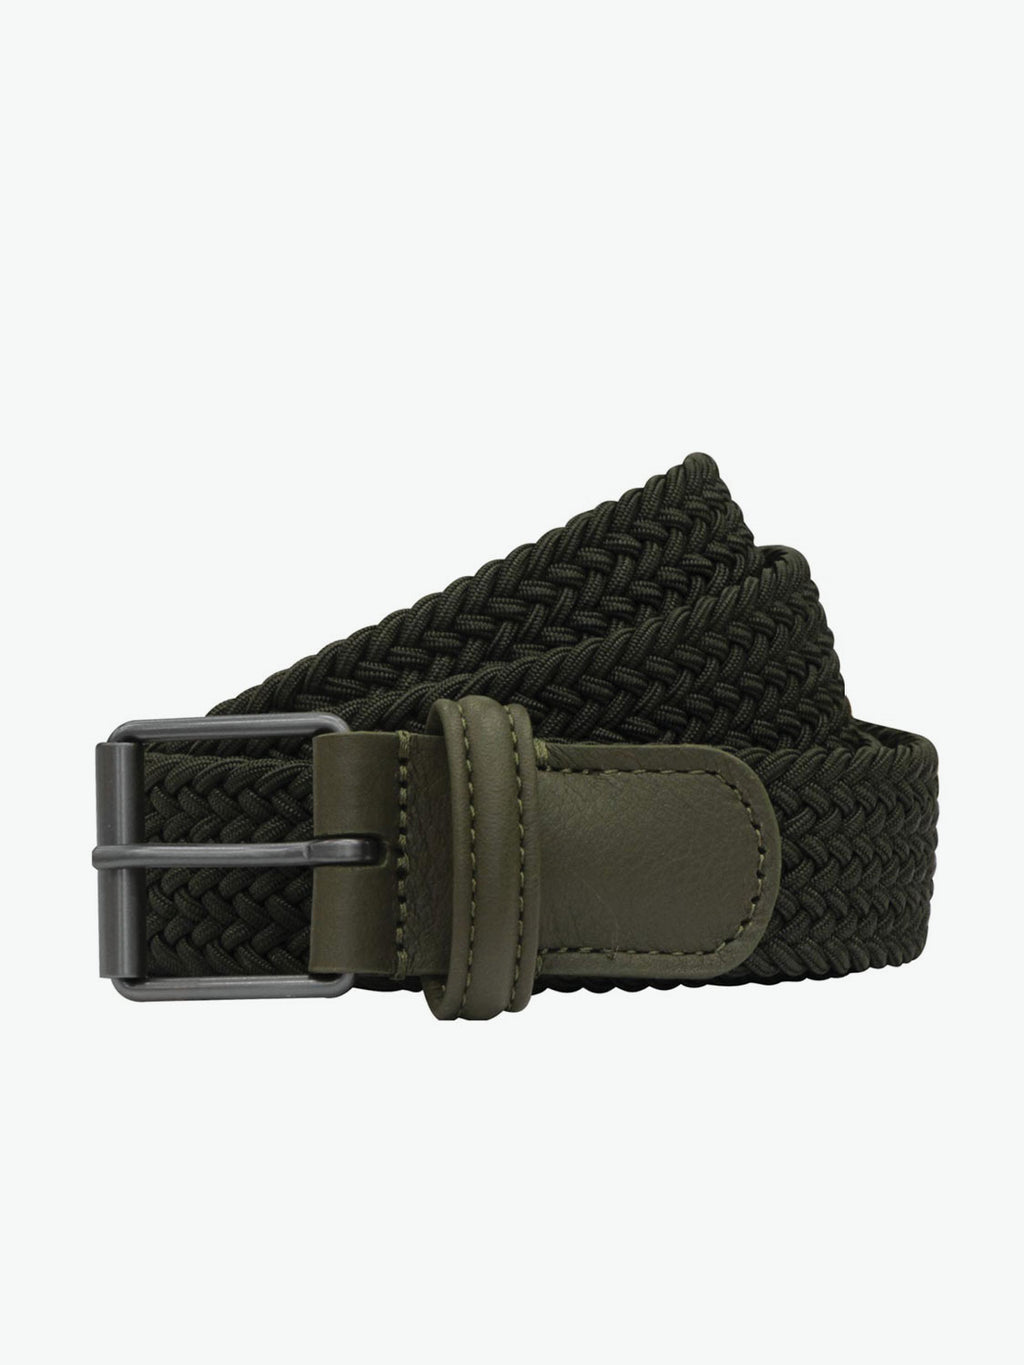 Anderson's Leather-Trimmed Woven Belt Green | A